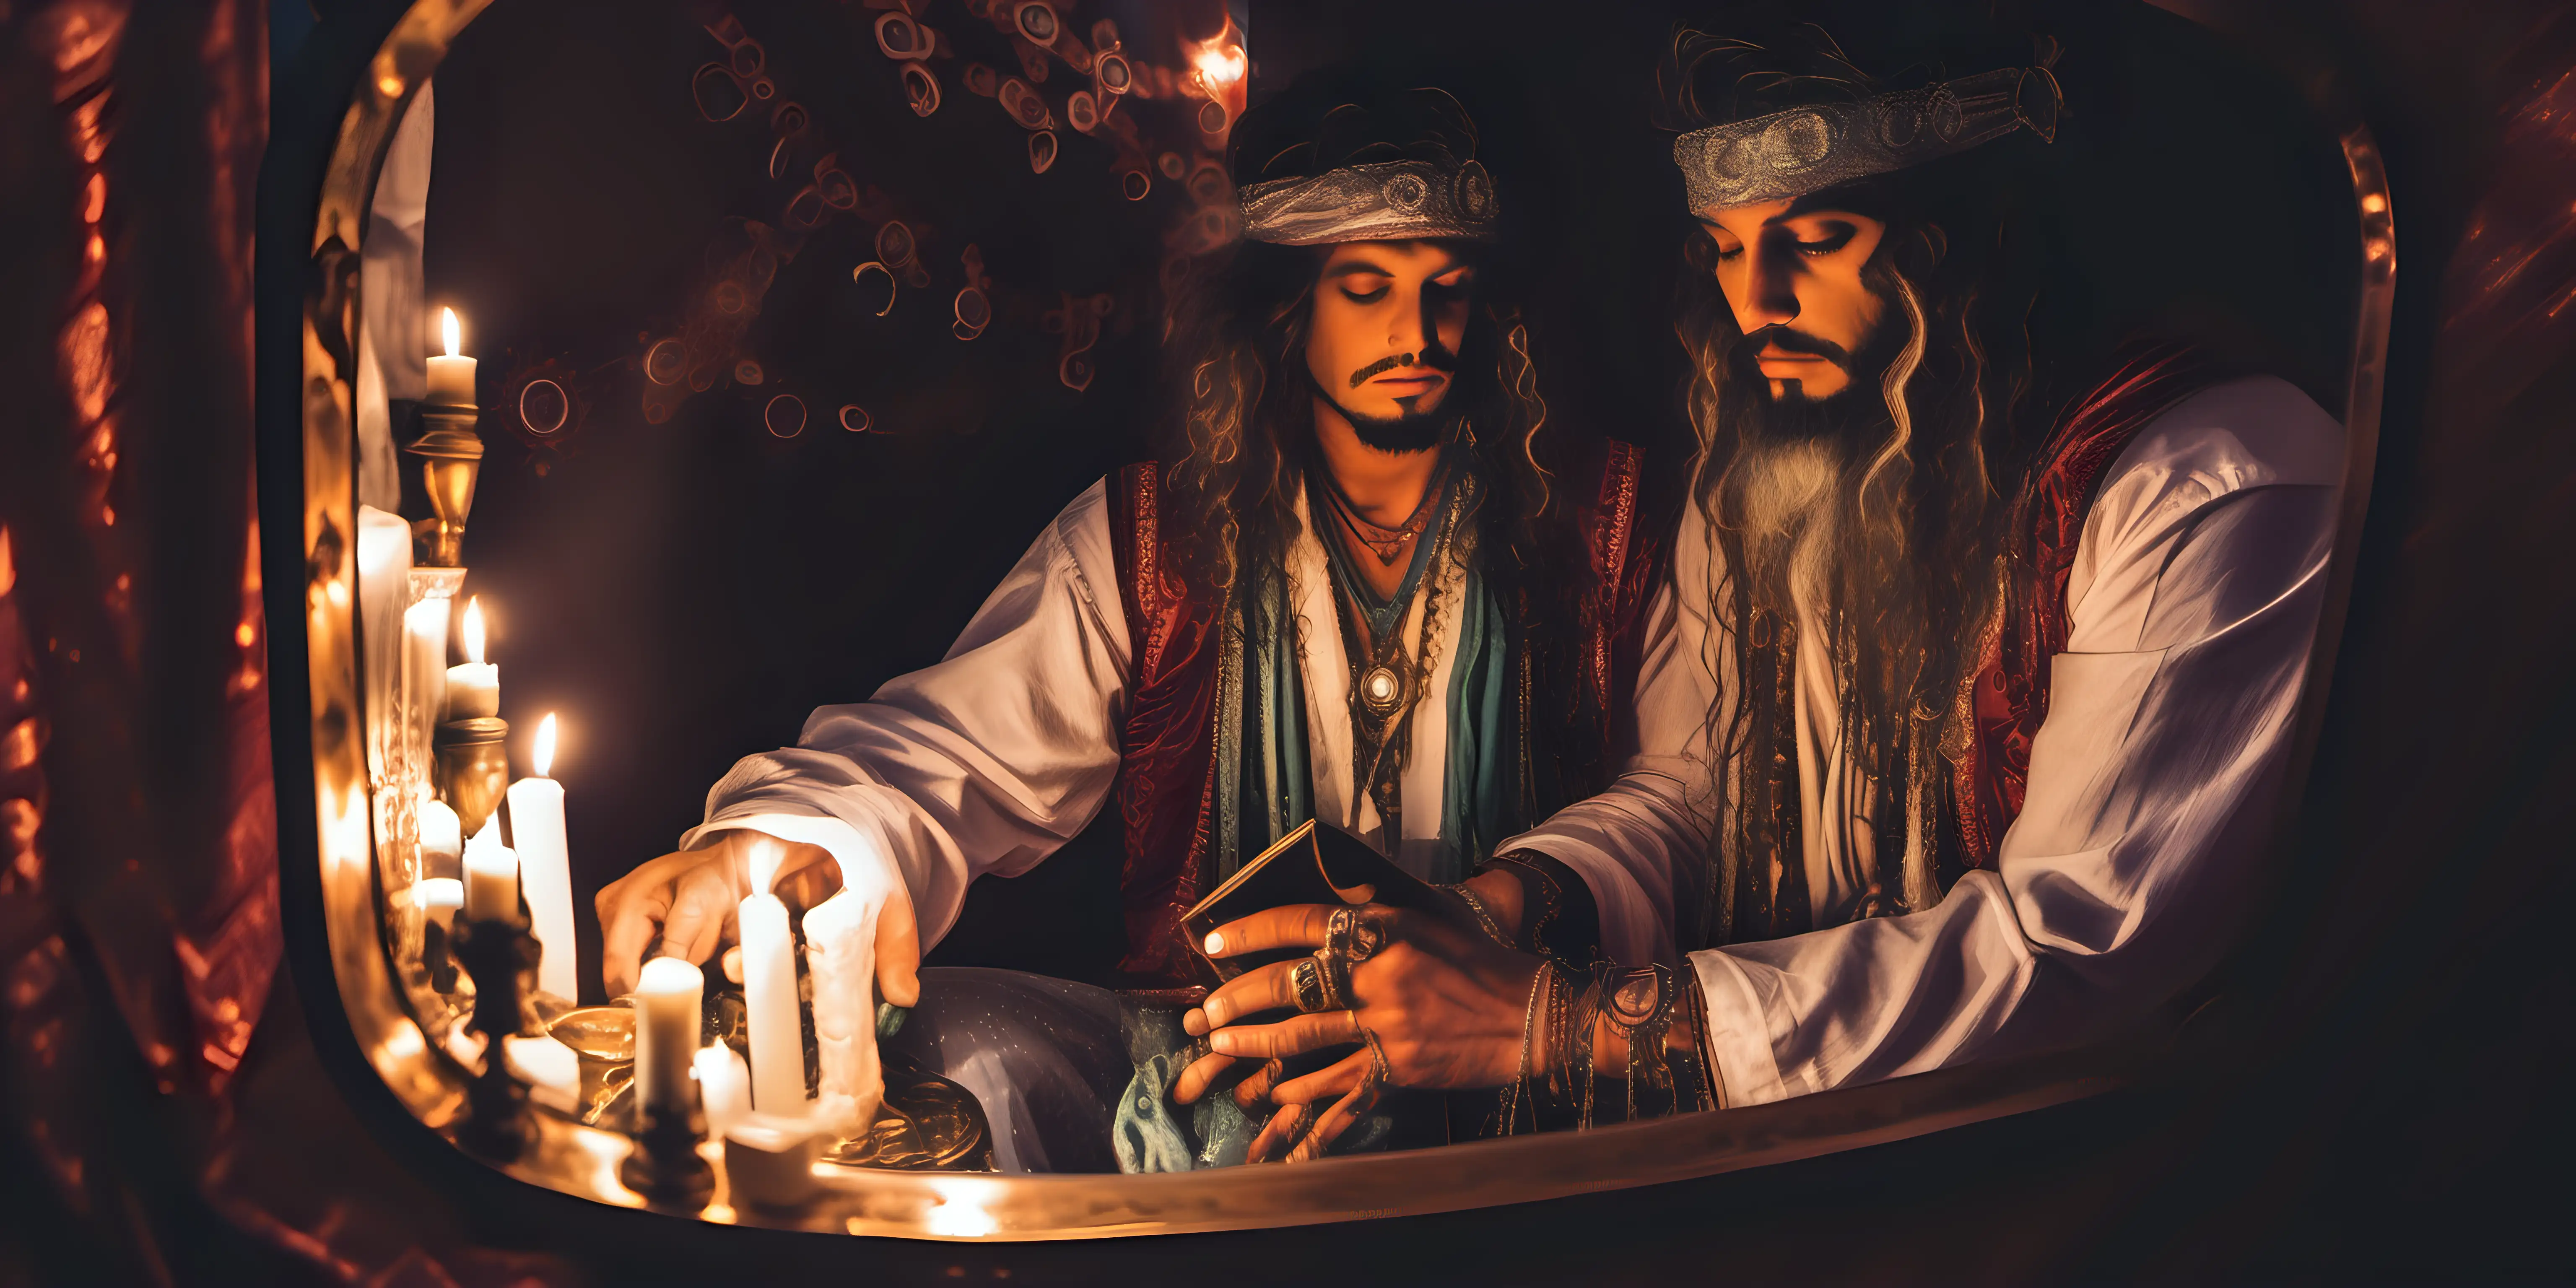 Magical Acts of Gypsy Sorcerer Joseph Mirror Scrying and Healing Wonders